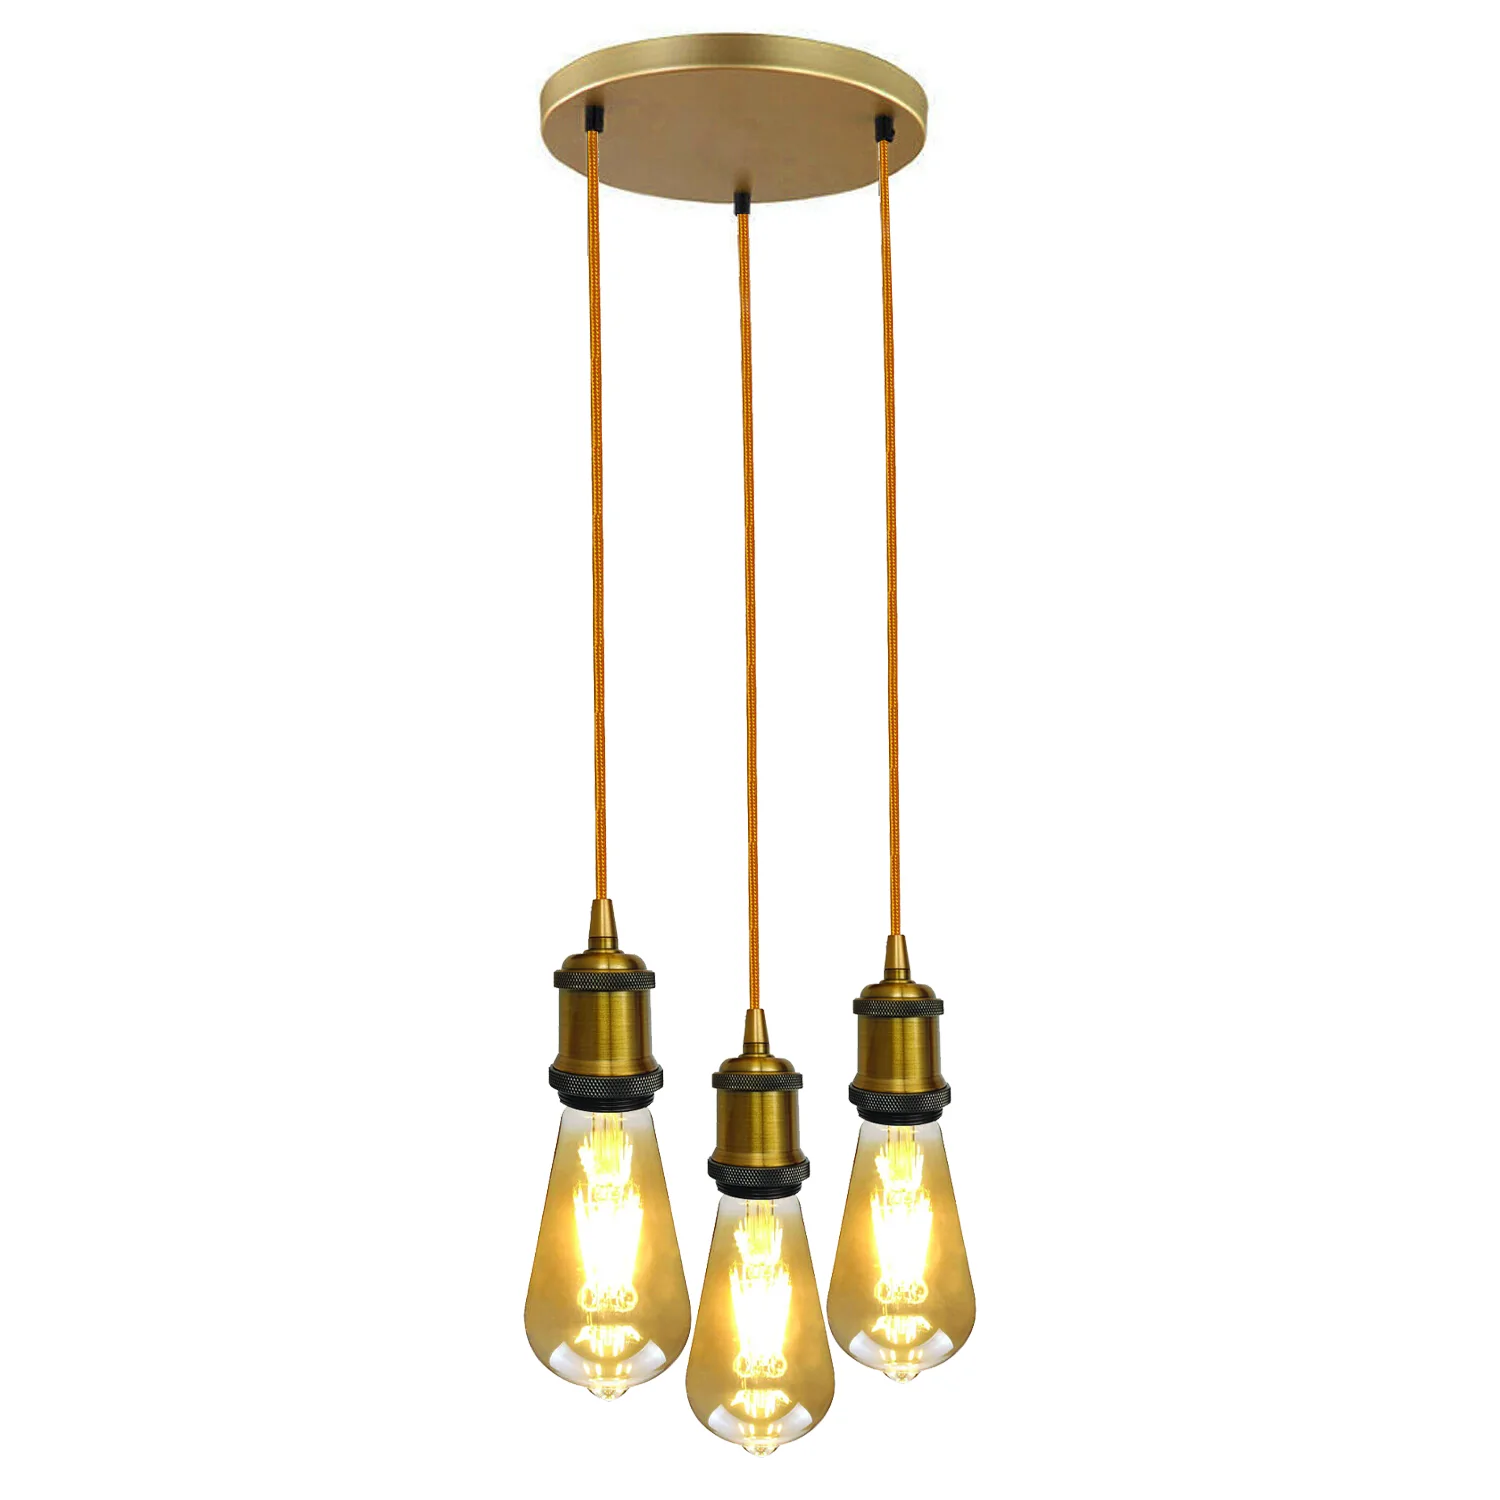 Three bulb chandelier with tinted bulb